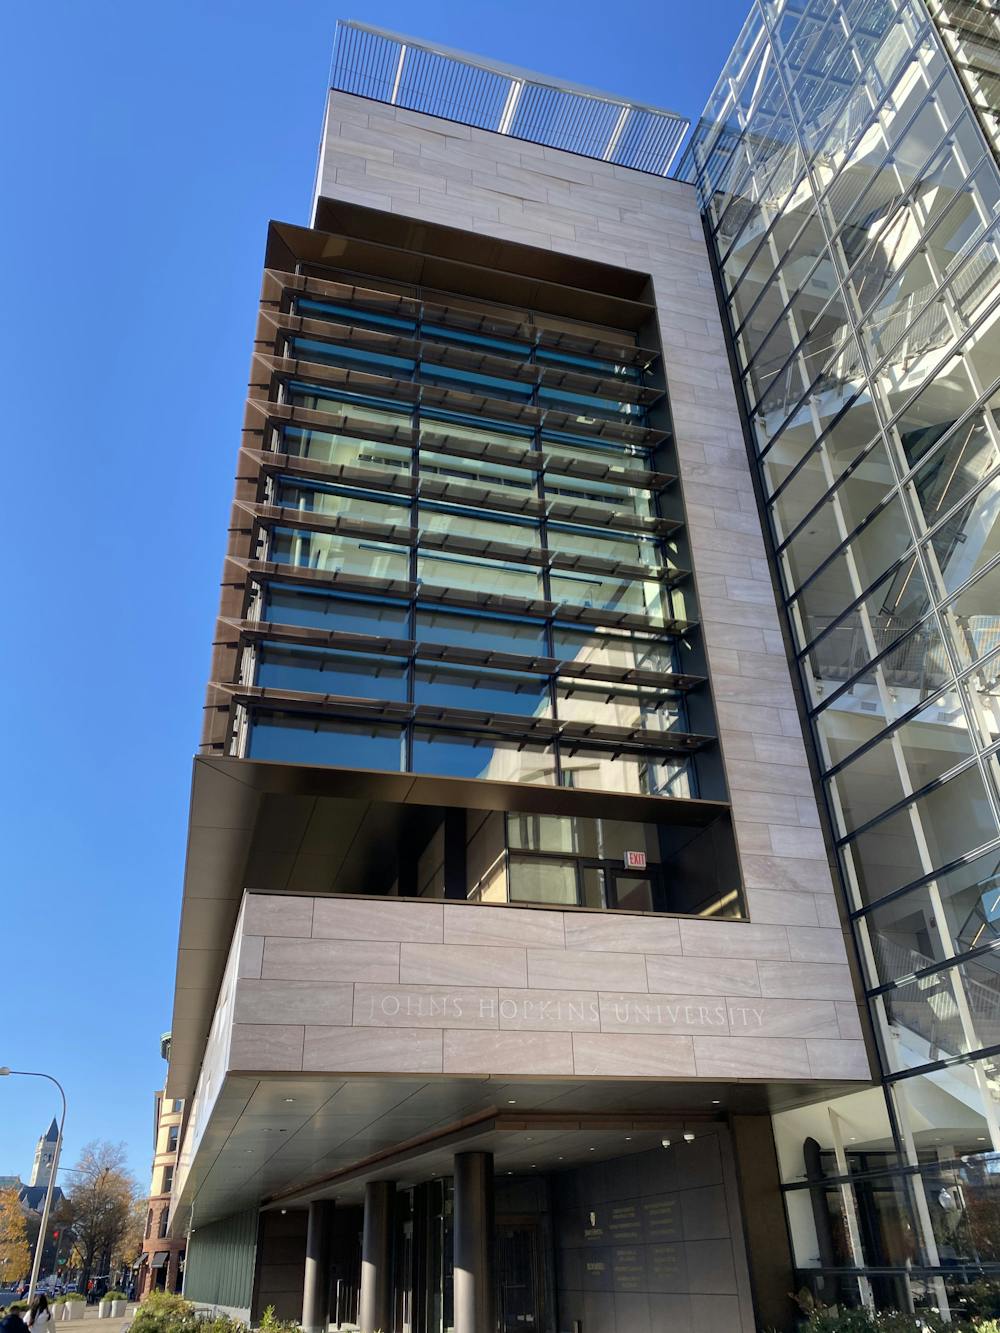 COURTESY OF NICK DAUM
With the new Hopkins Semester in D.C. program, students are given the opportunity to study at the Johns Hopkins Bloomberg Center at 555 Pennsylvania Avenue and are encouraged to pursue independent research.